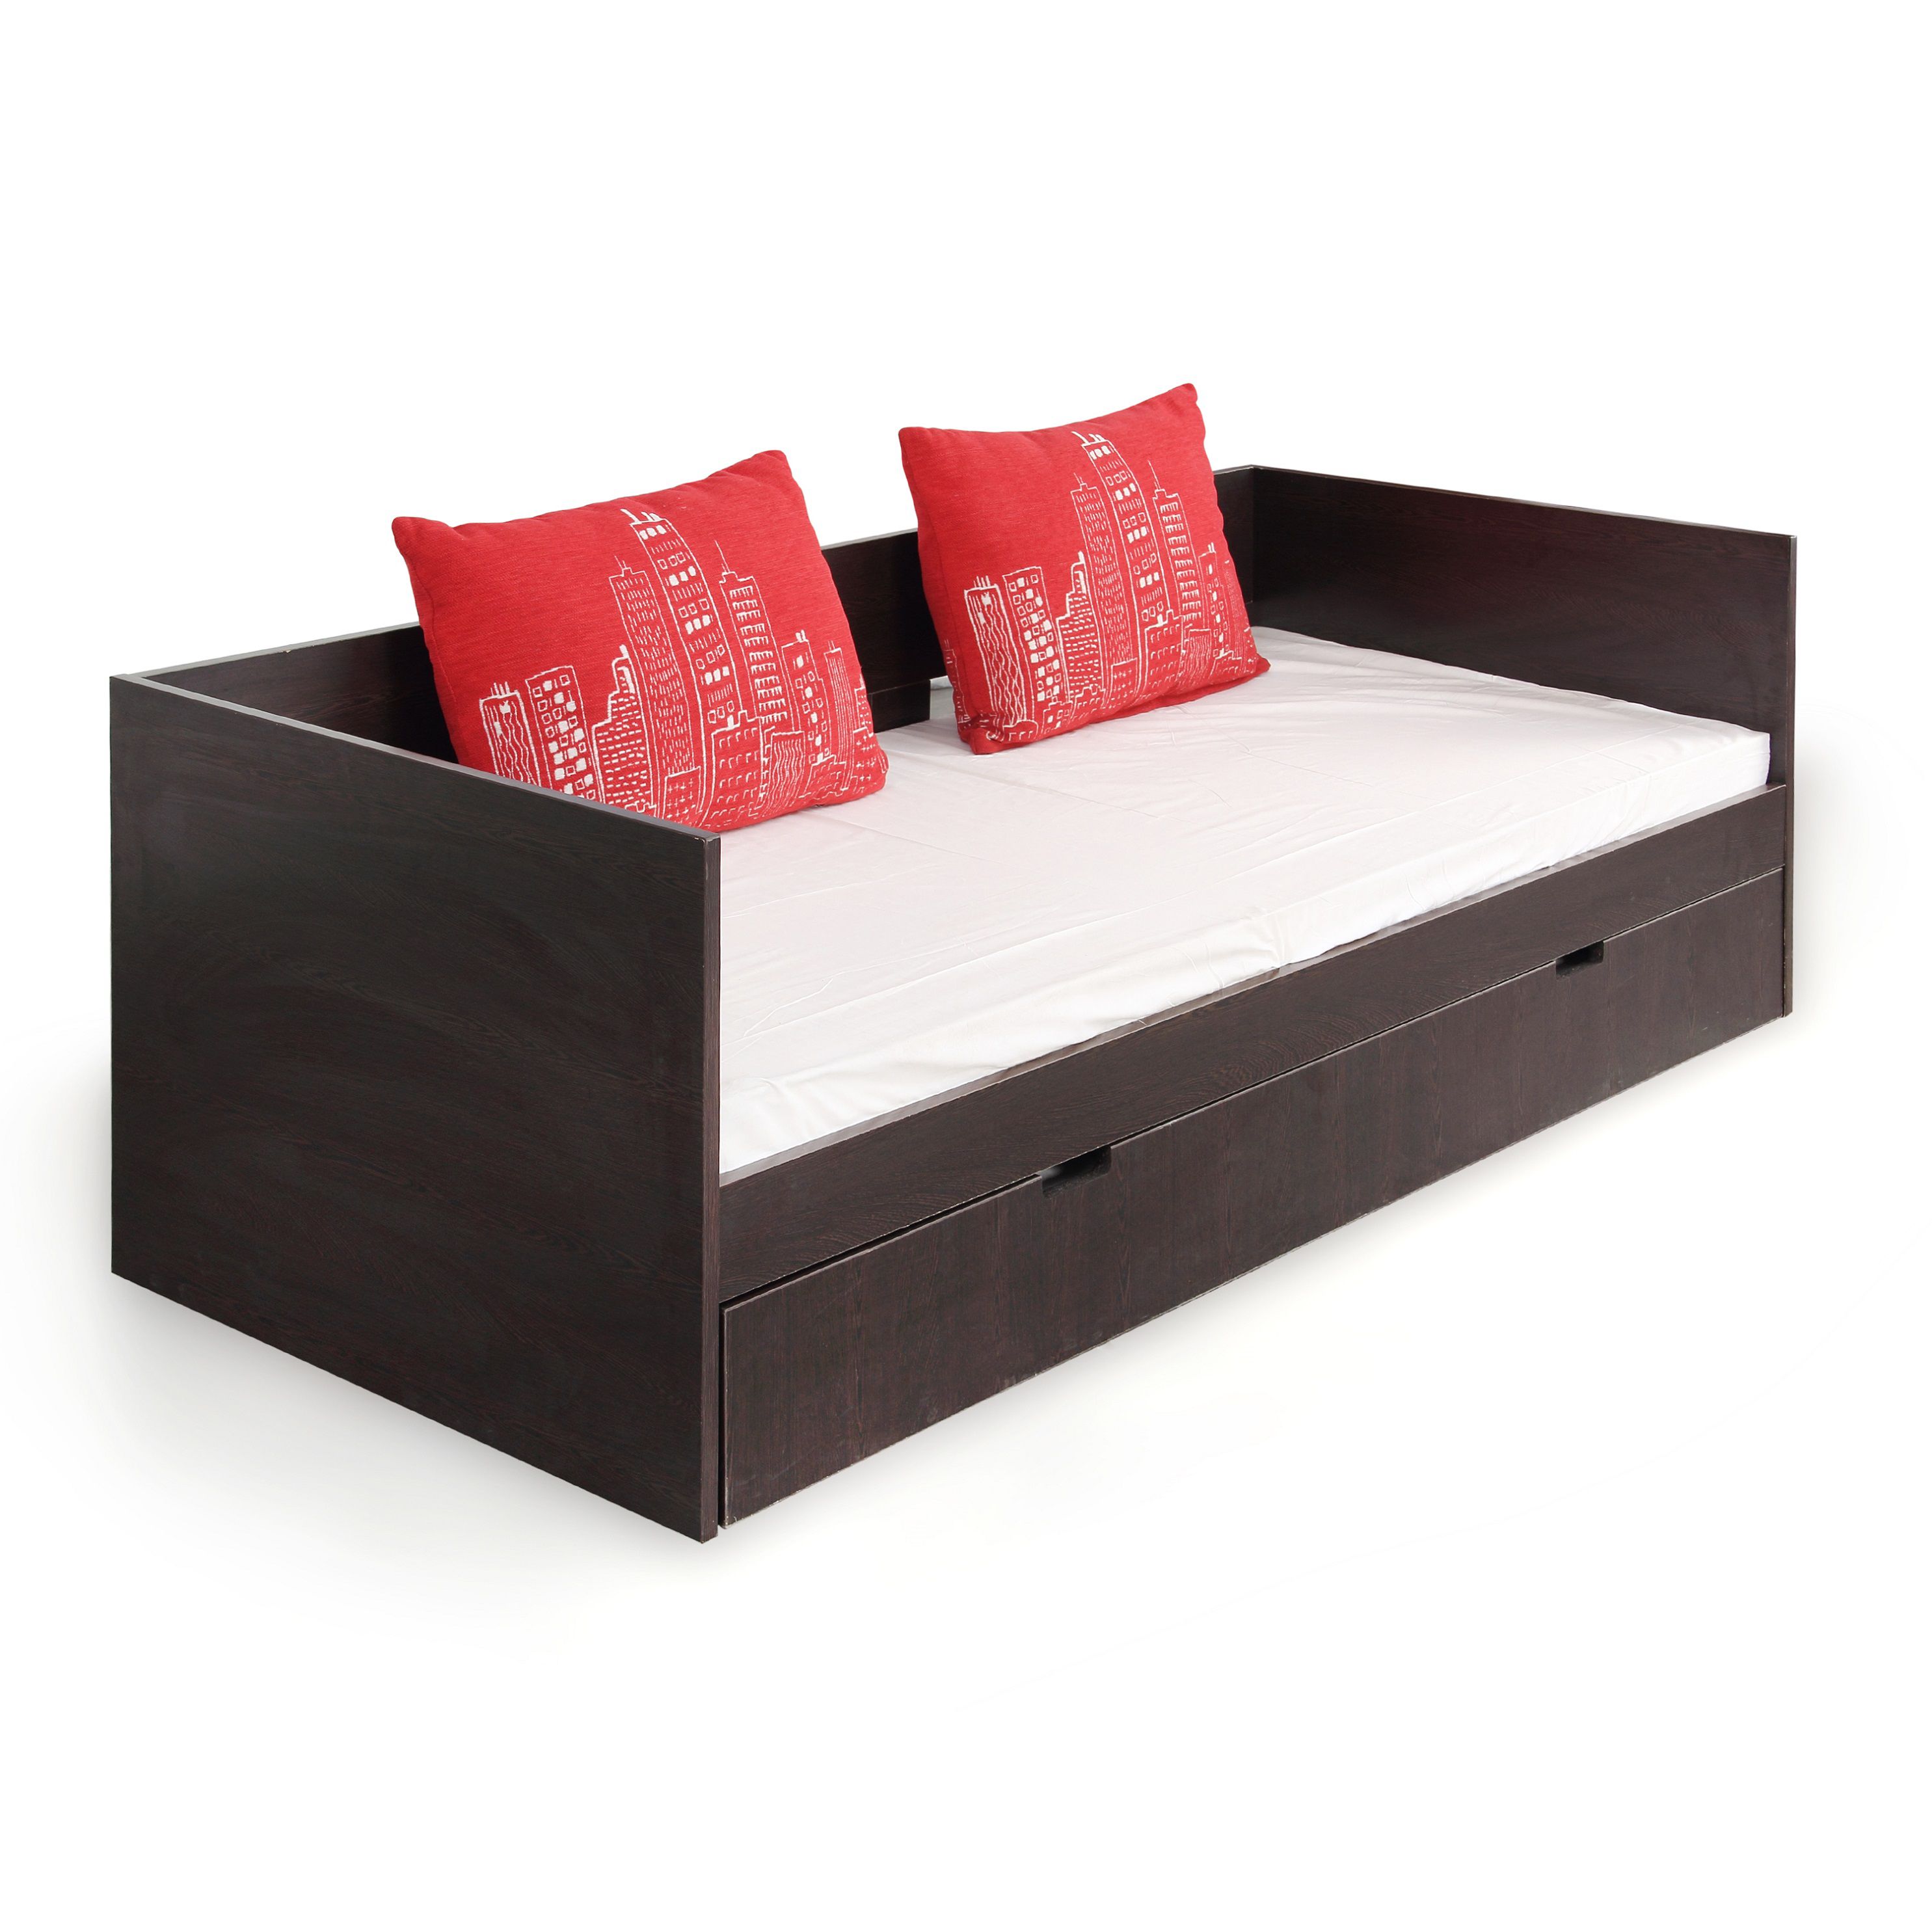 Forzaa Murray Daybed Buy Forzaa Murray Daybed line at Best Prices in India on Snapdeal